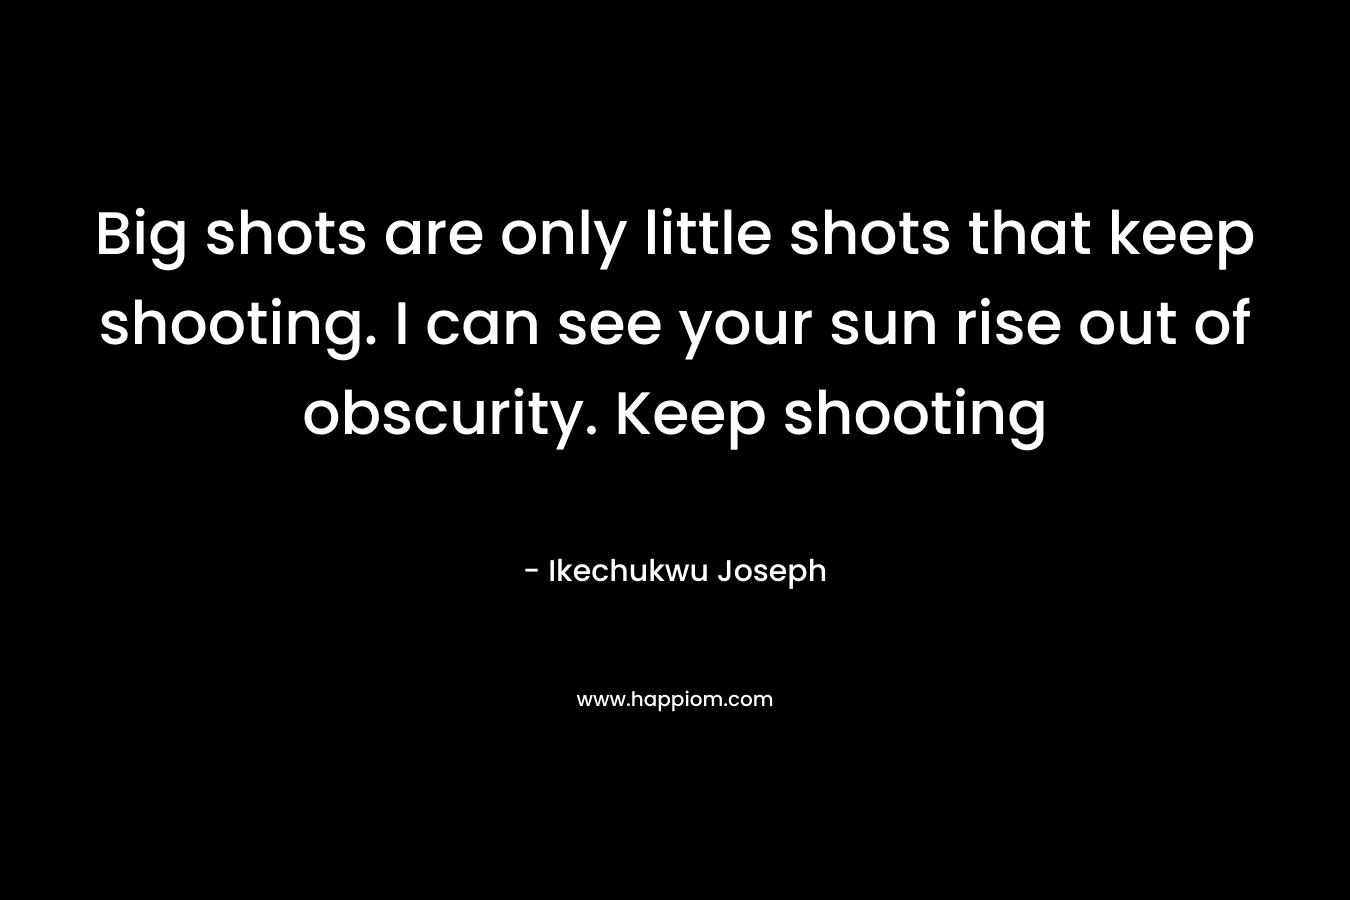 Big shots are only little shots that keep shooting. I can see your sun rise out of obscurity. Keep shooting – Ikechukwu Joseph